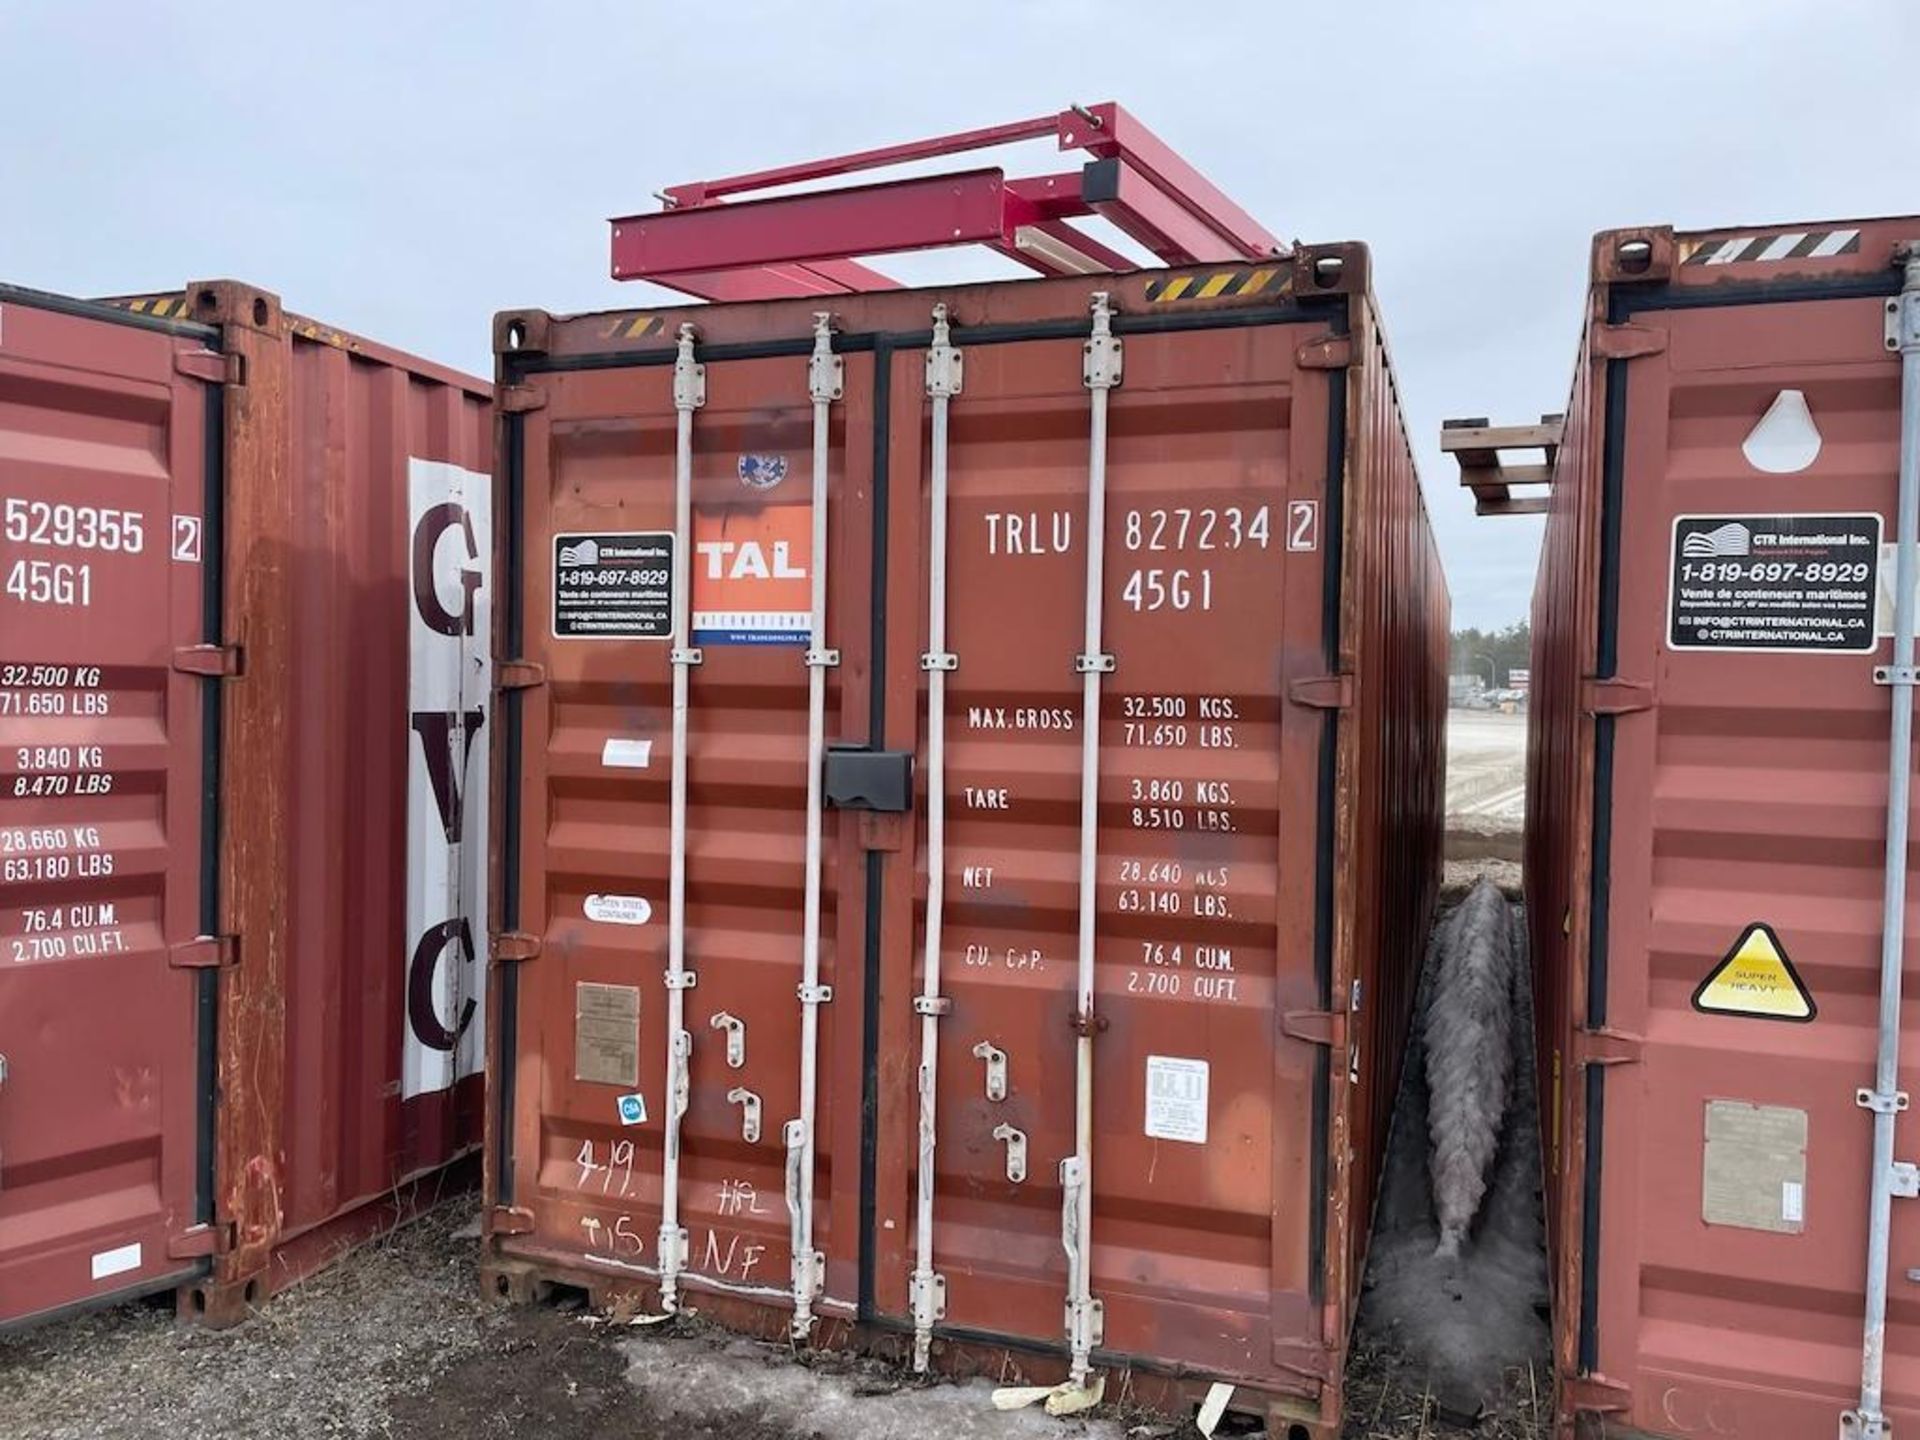 40 FT SEA CONTAINER, EXCLUDING CONTENTS, DELAYED PICK UP UNTIL MAY 13 [2] [TROIS RIVIERES] *PLEASE N - Image 2 of 4